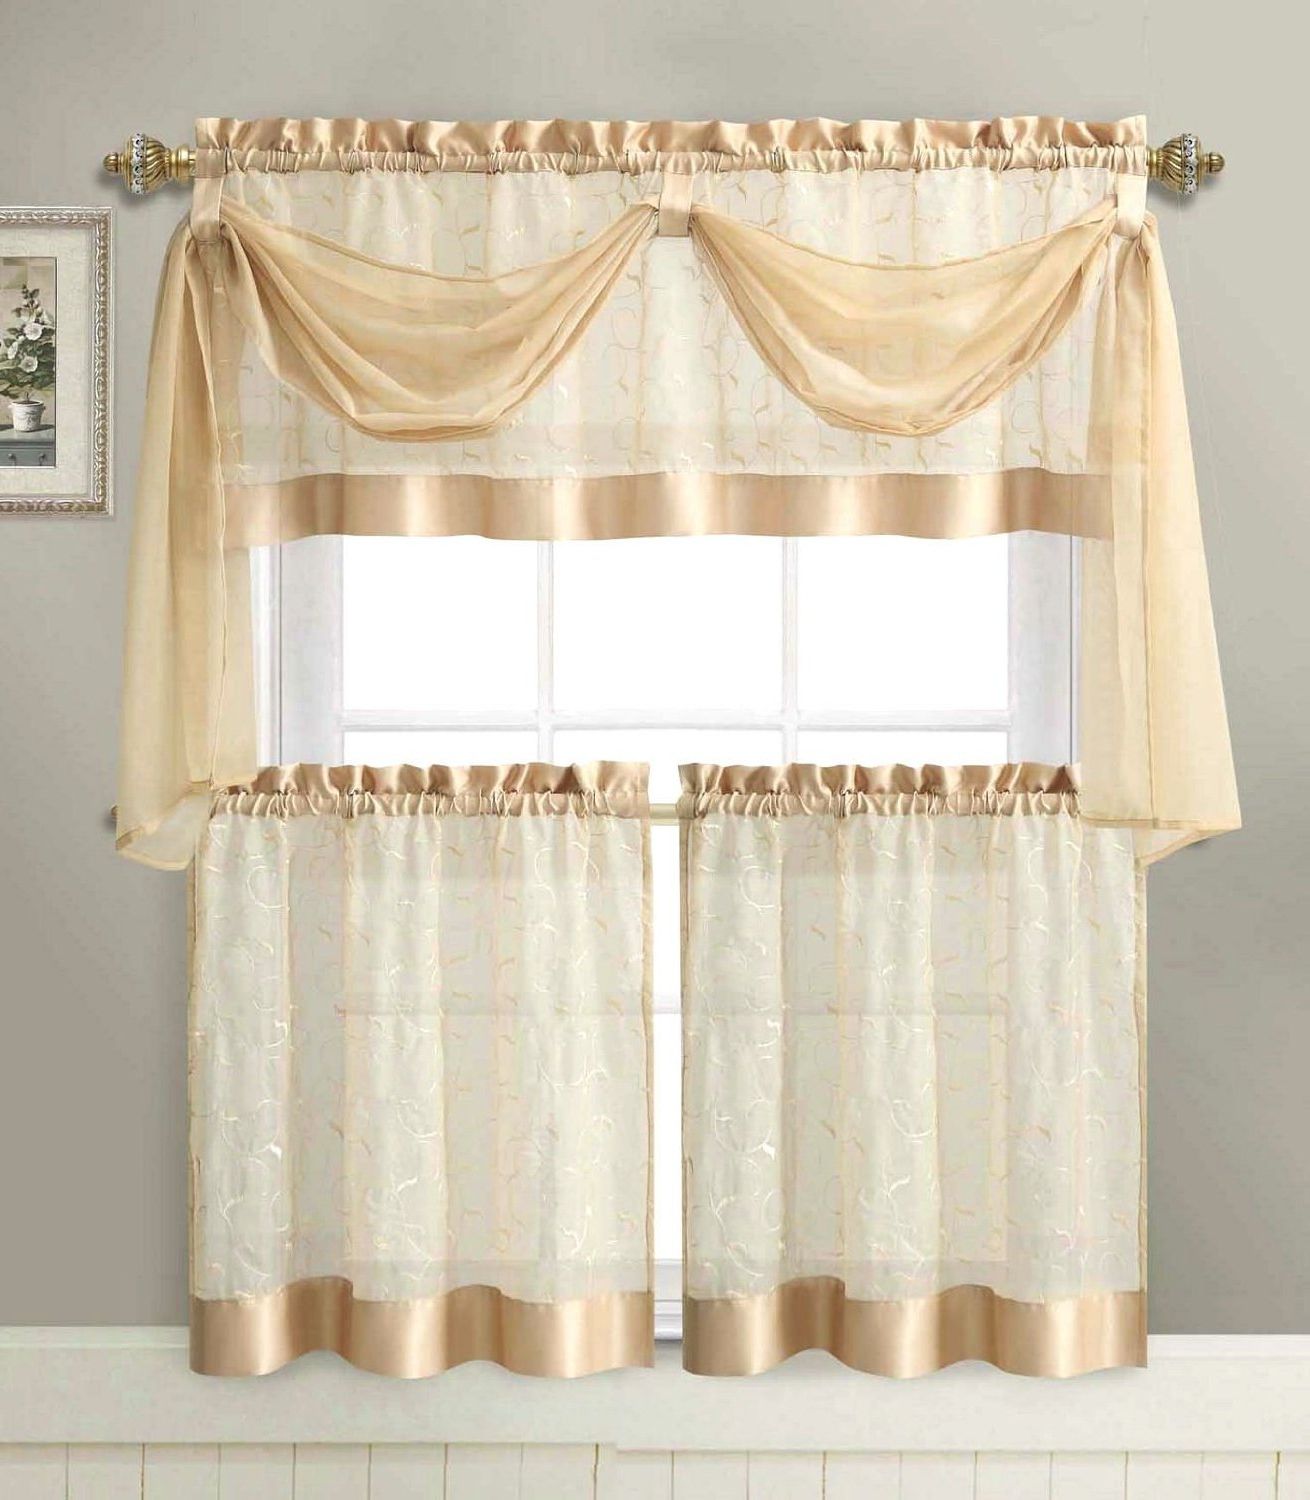 Embroidered Coffee Cup 5 Piece Kitchen Curtain Sets Inside Best And Newest Linen Leaf 4 Pc Tier Valance Kitchen Curtain Set Gold 